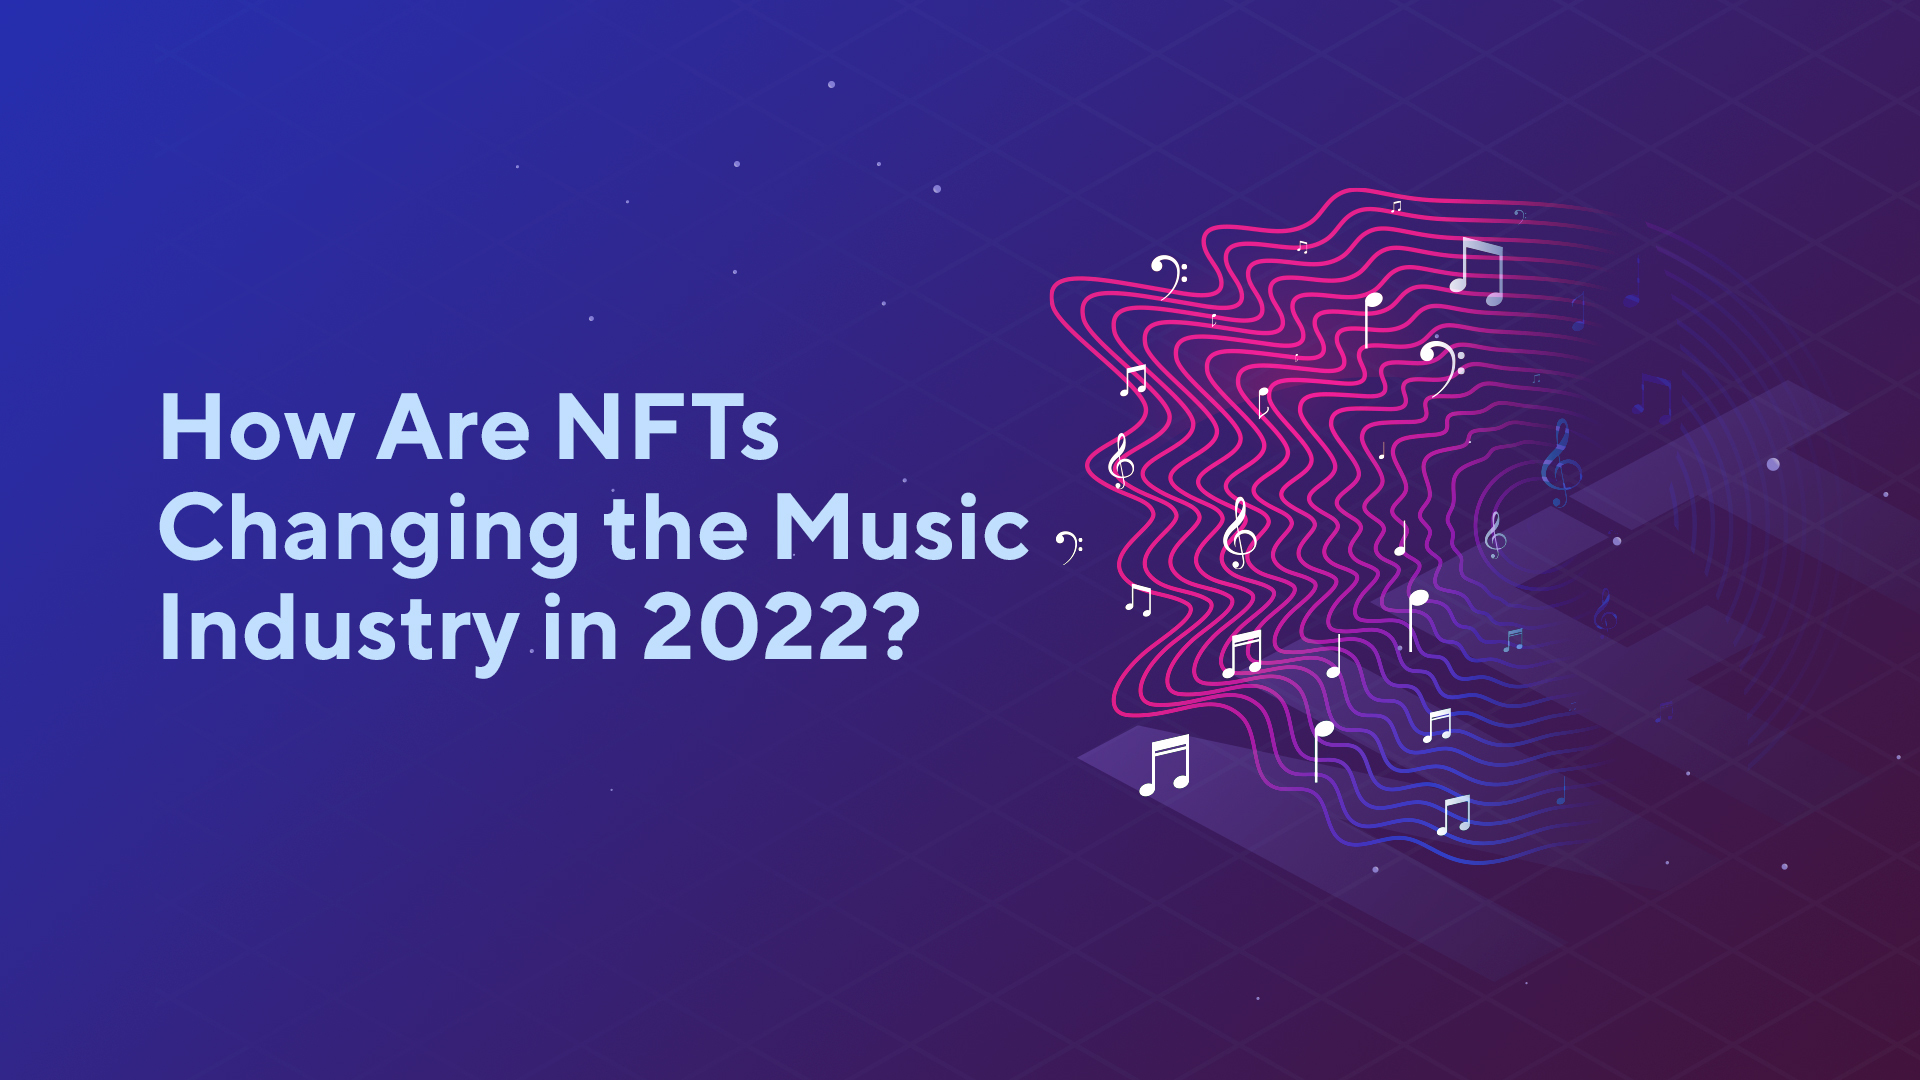 How Are NFTs Changing the Music Industry in 2023?